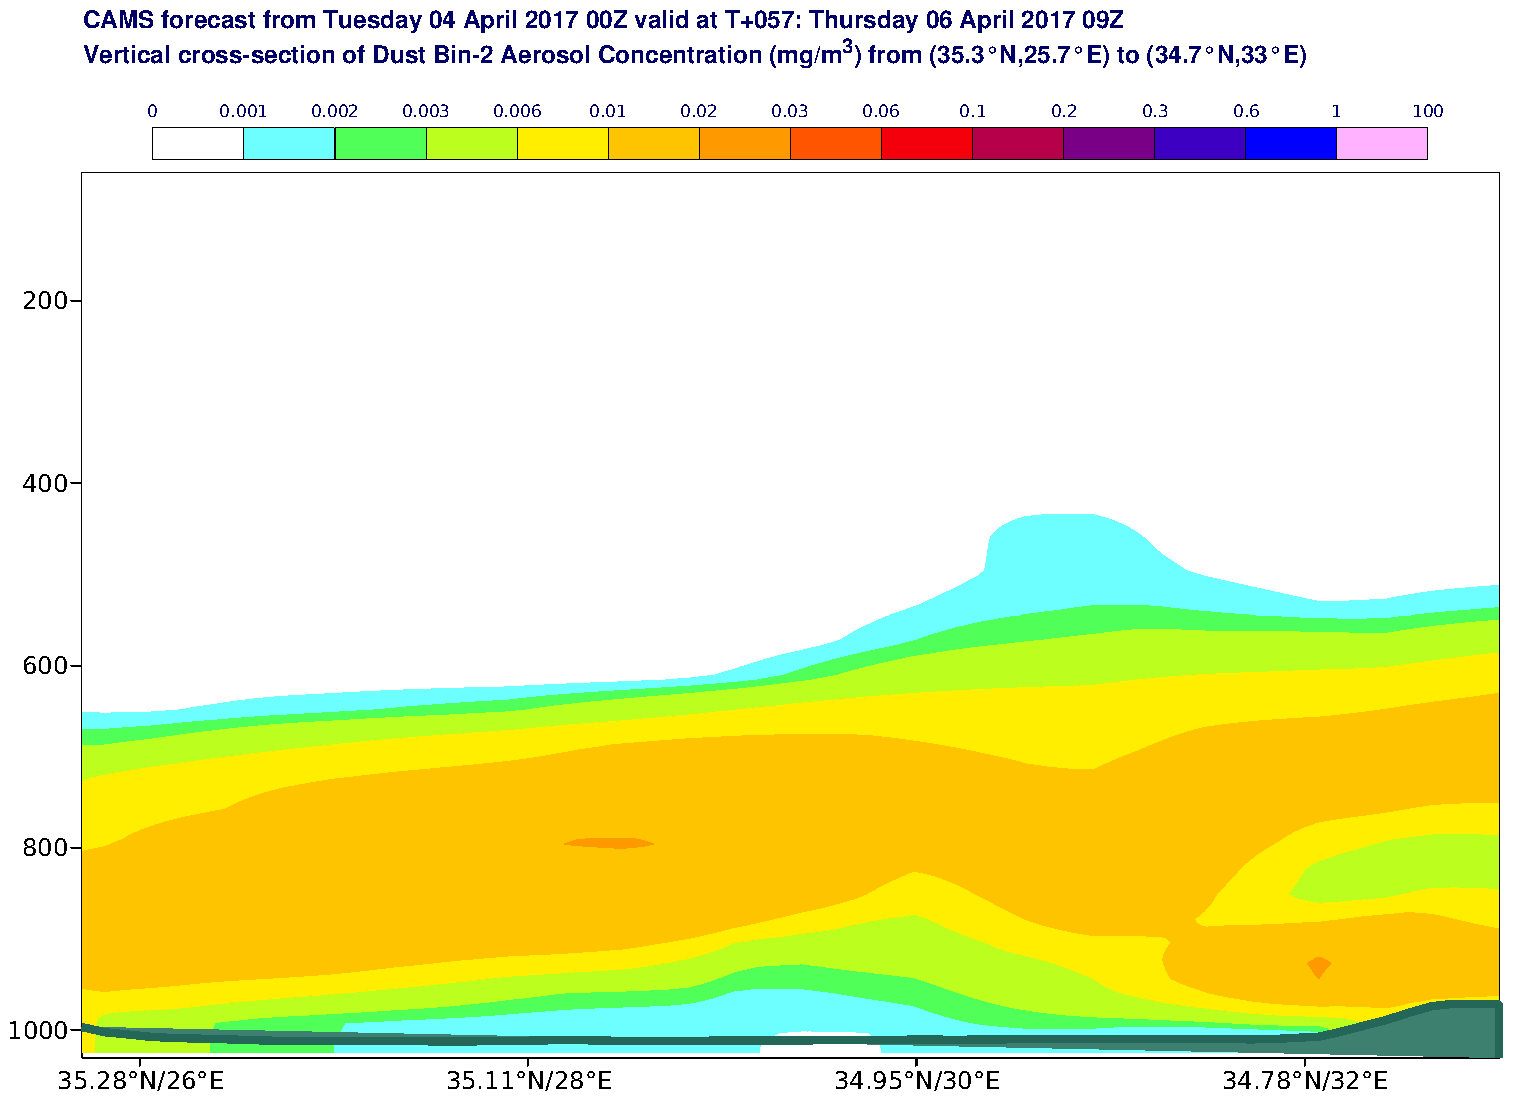 Vertical cross-section of Dust Bin-2 Aerosol Concentration (mg/m3) valid at T57 - 2017-04-06 09:00